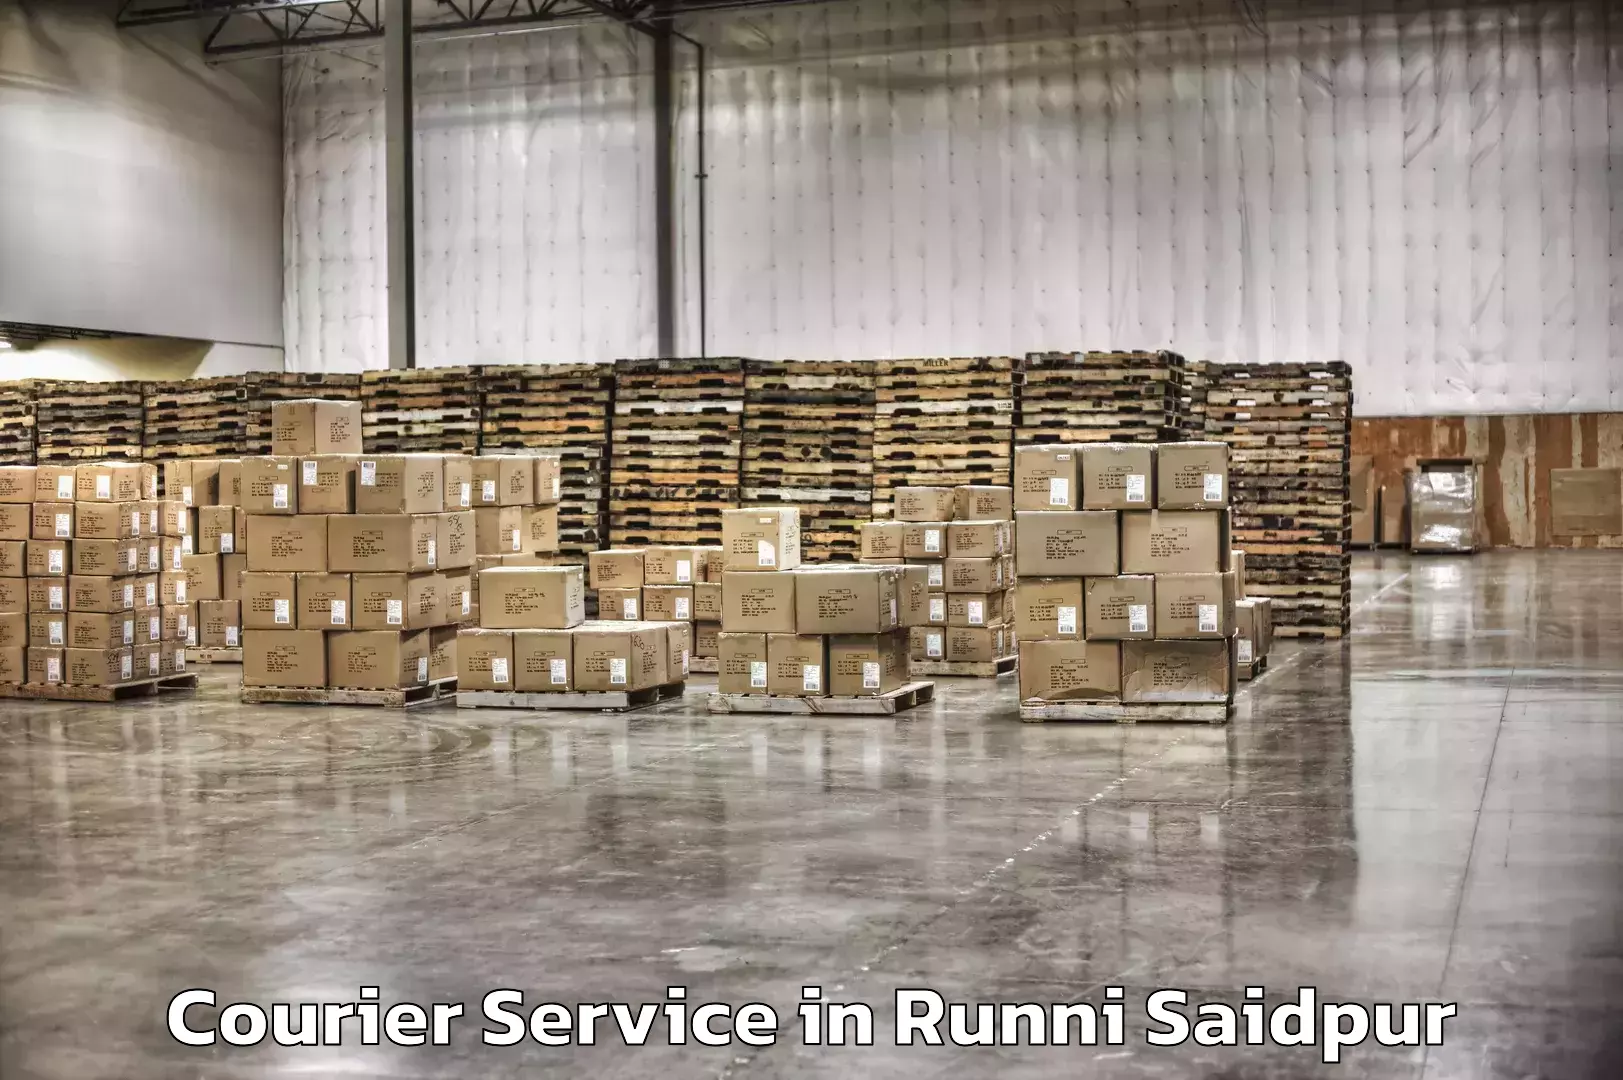 24-hour courier service in Runni Saidpur